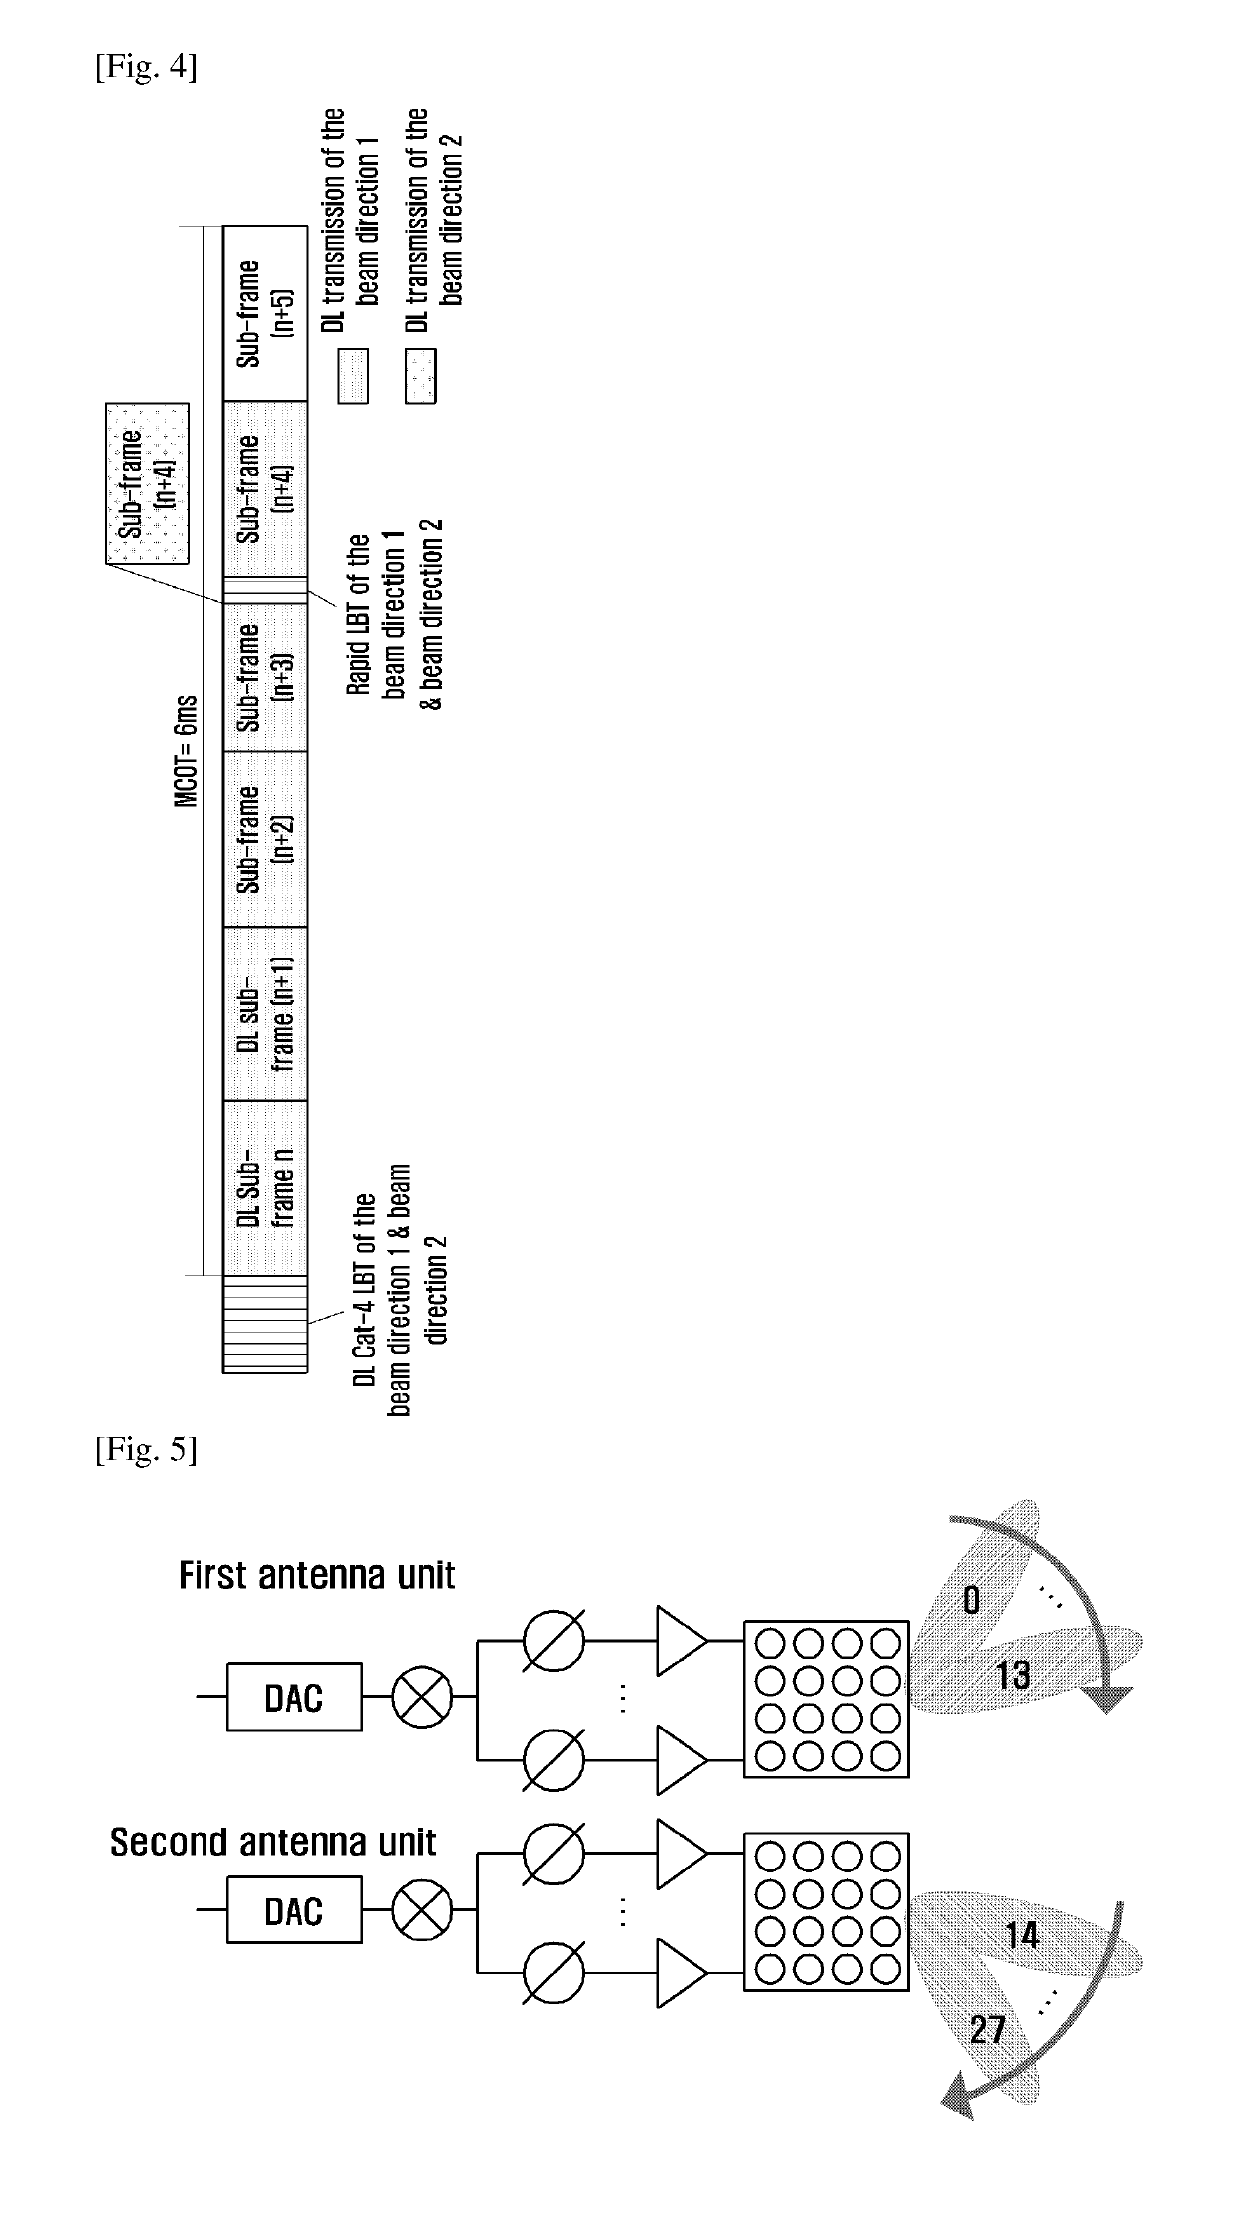 Methods and devices for transmitting and receiving signals